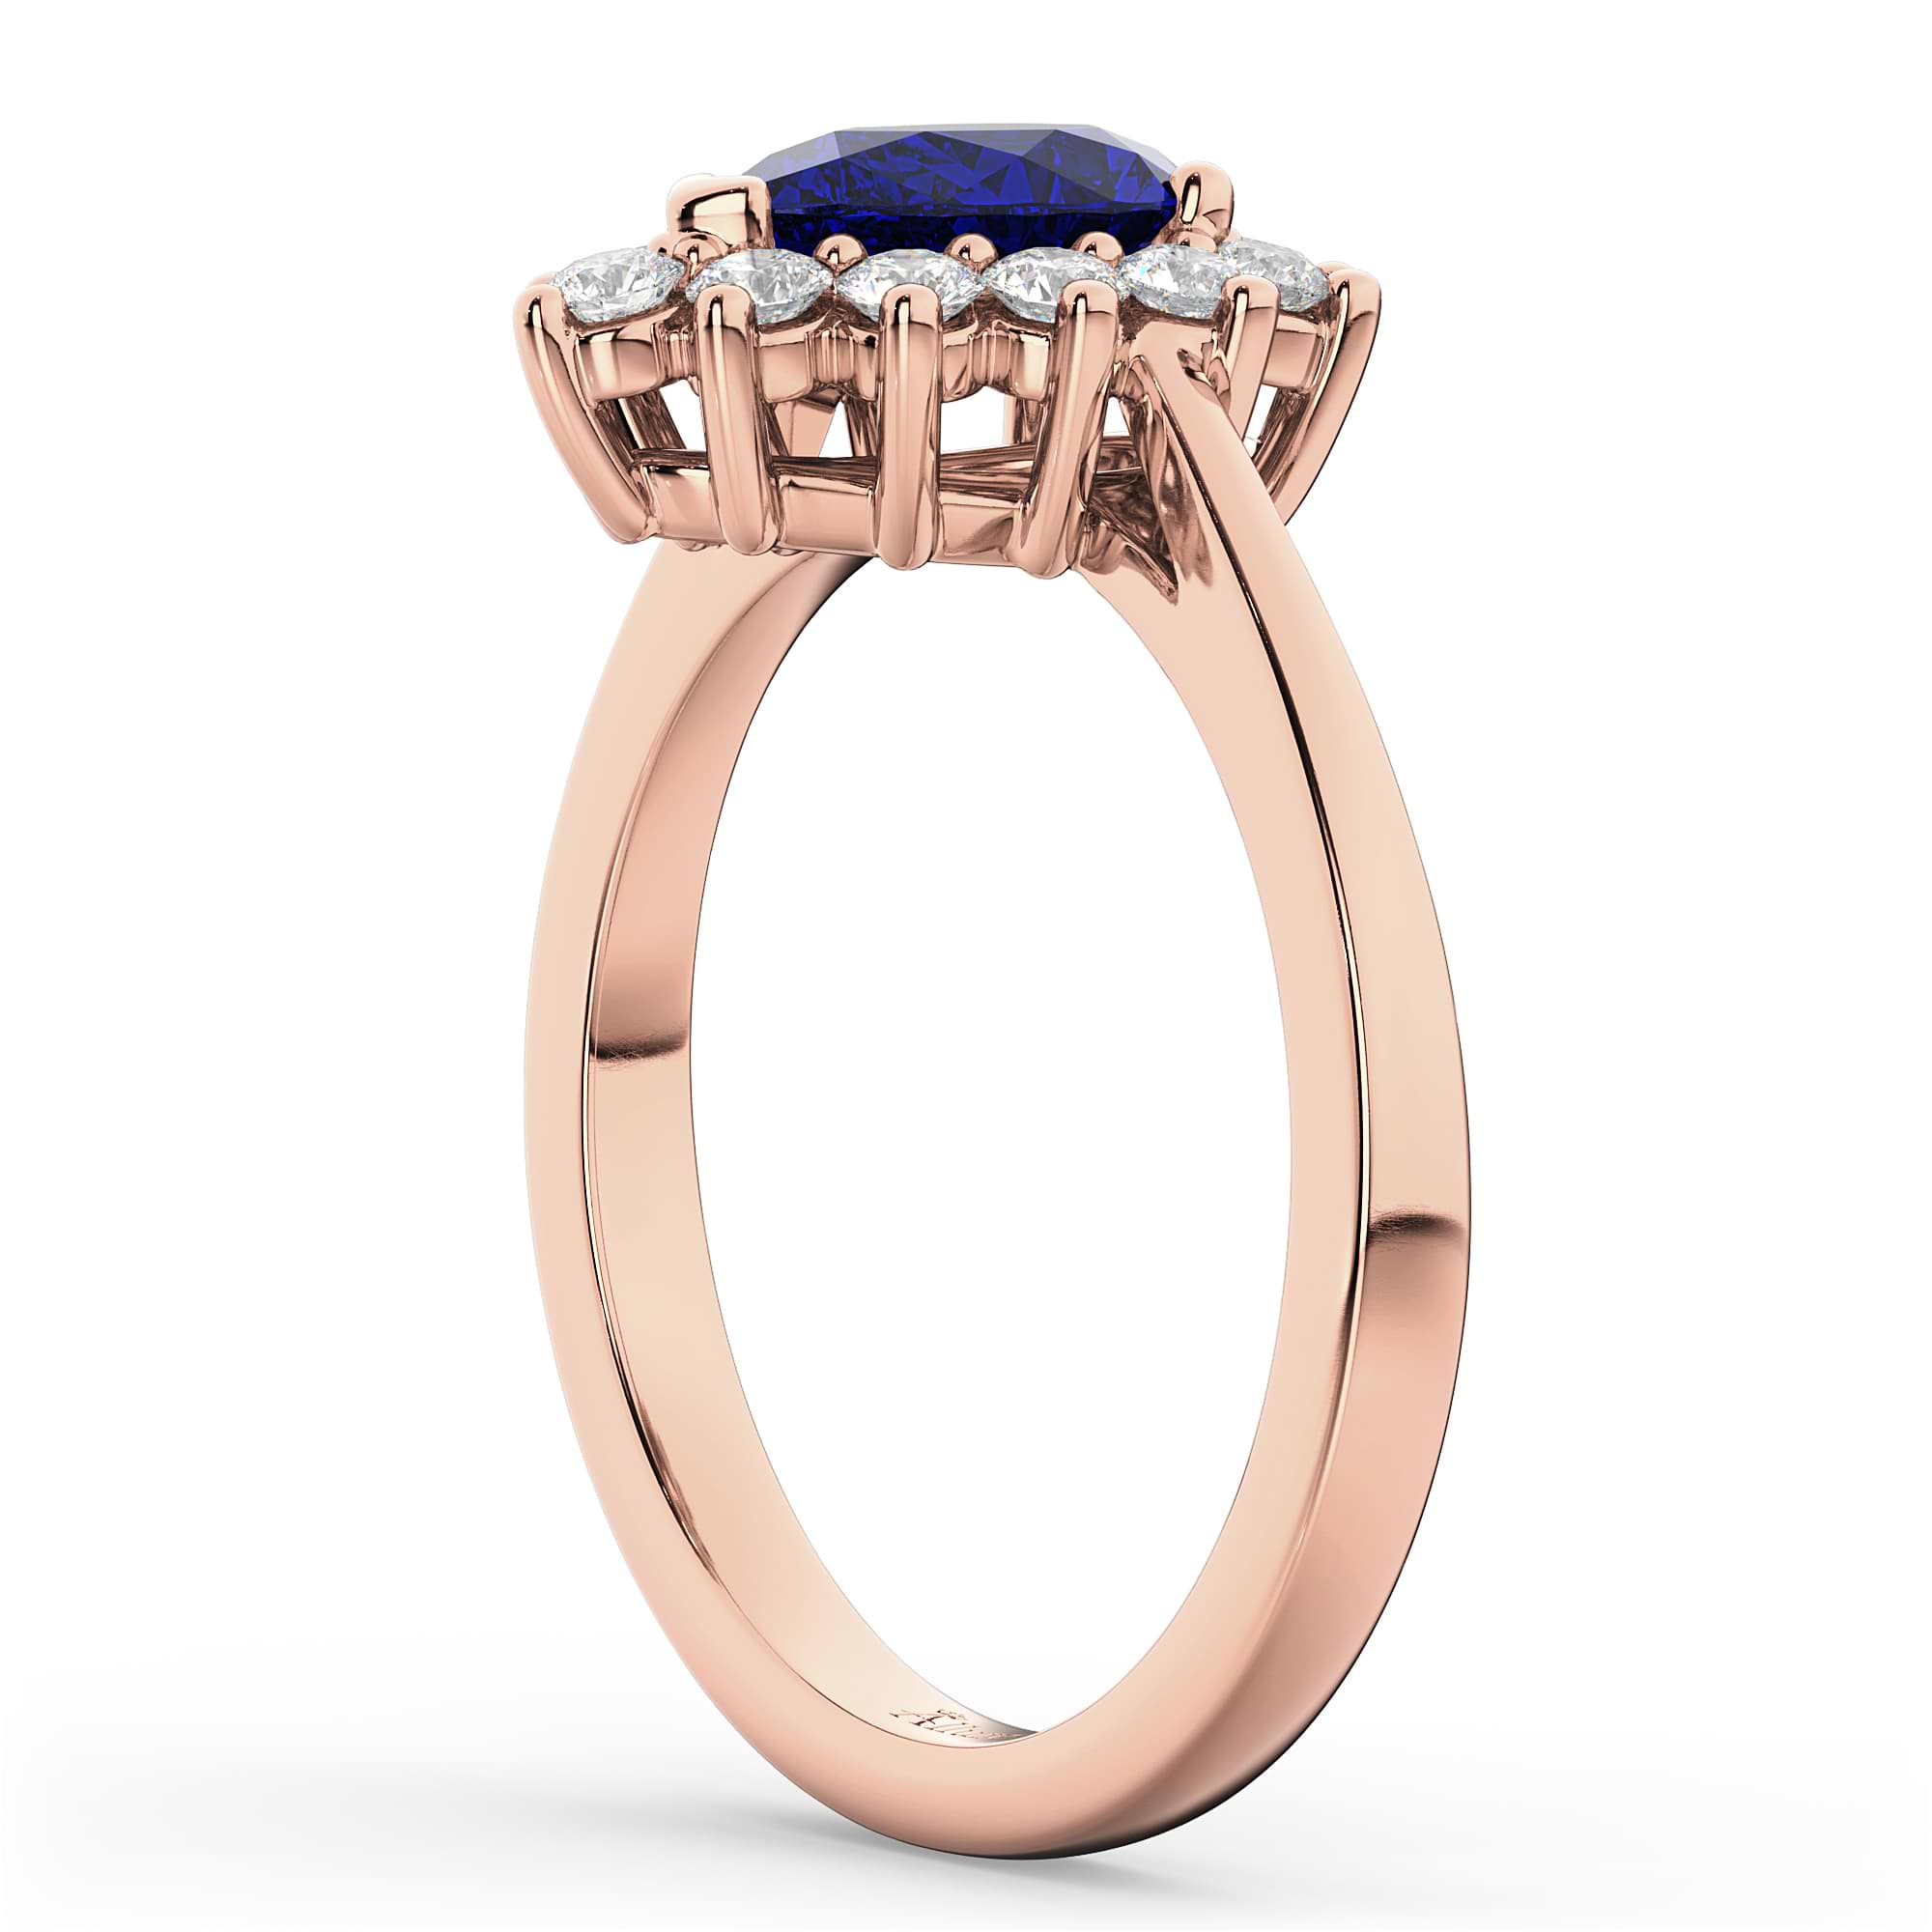 Halo Blue Sapphire & Diamond Floral Pear Shaped Fashion Ring 14k Rose Gold (1.27ct)